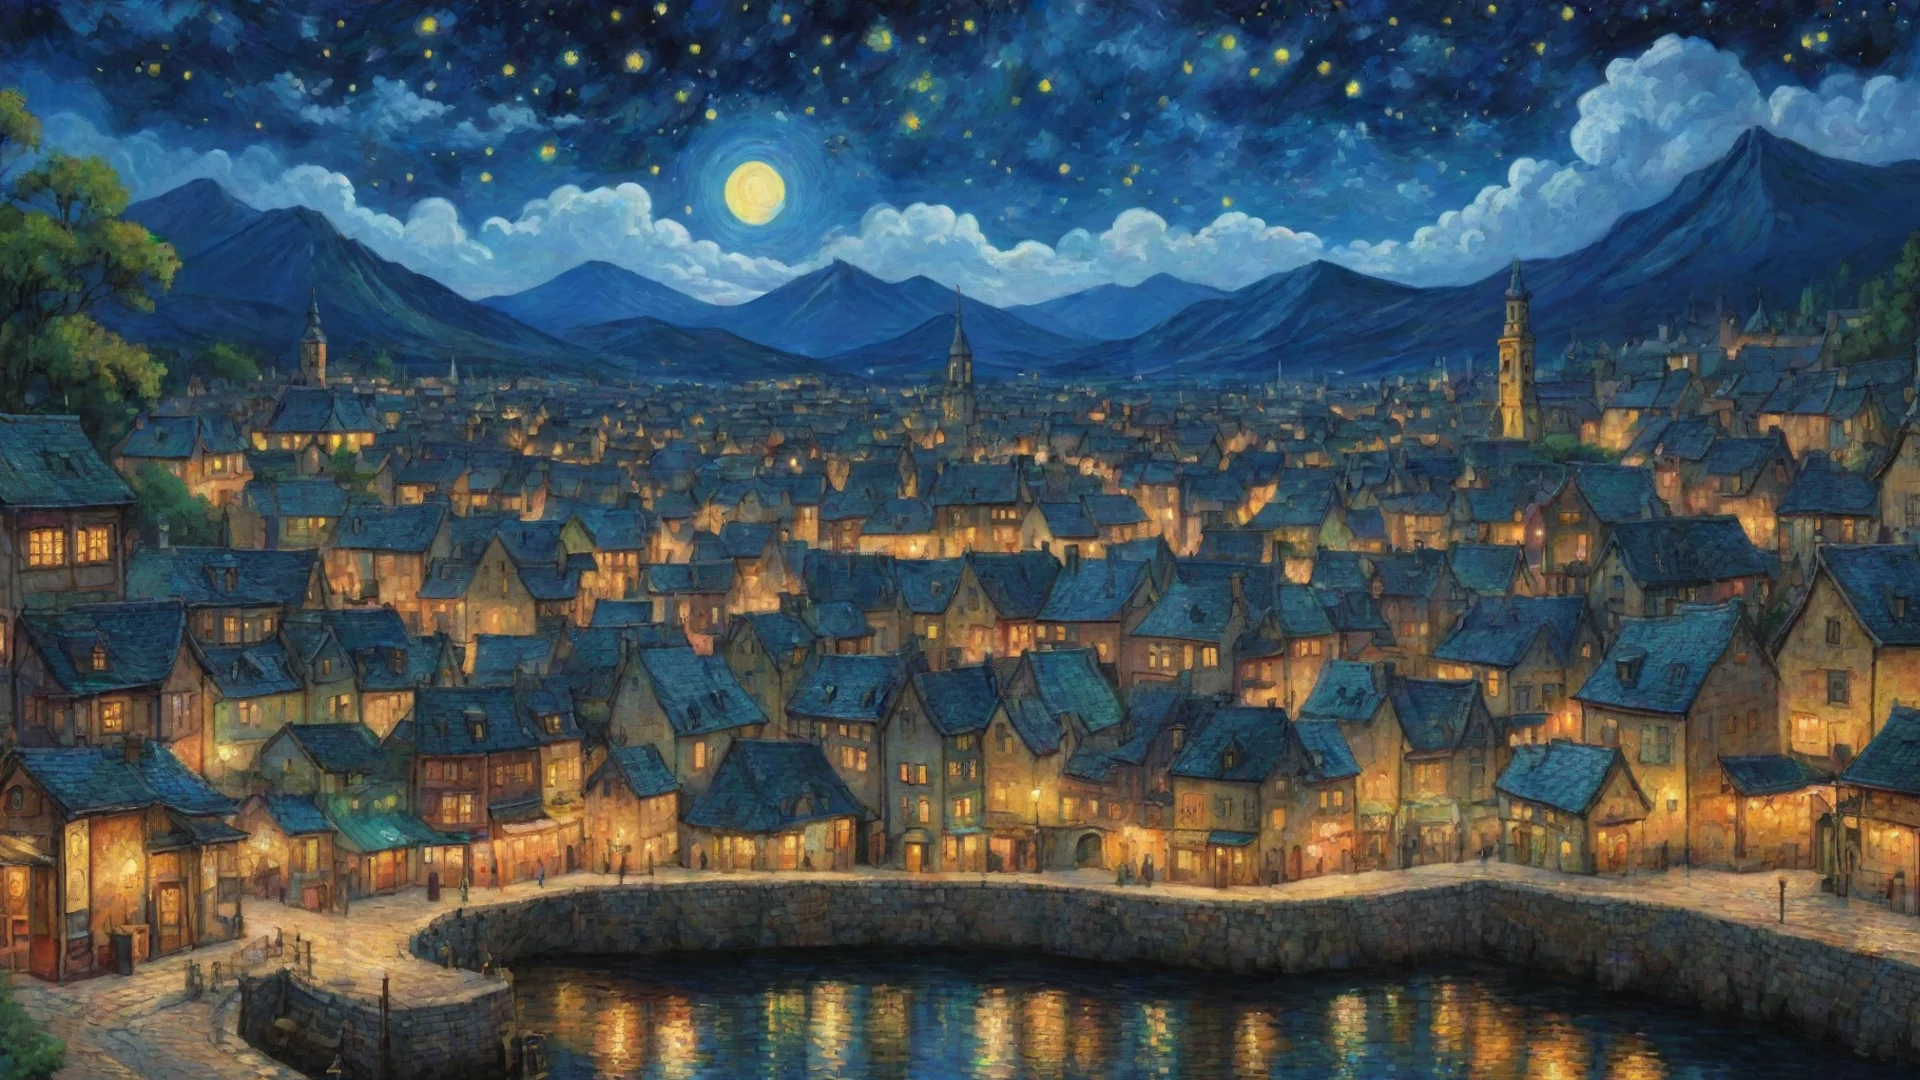 town lit up at night sky epic lovely artistic ghibli van gogh happyness bliss peace  detailed asthetic hd wow wide